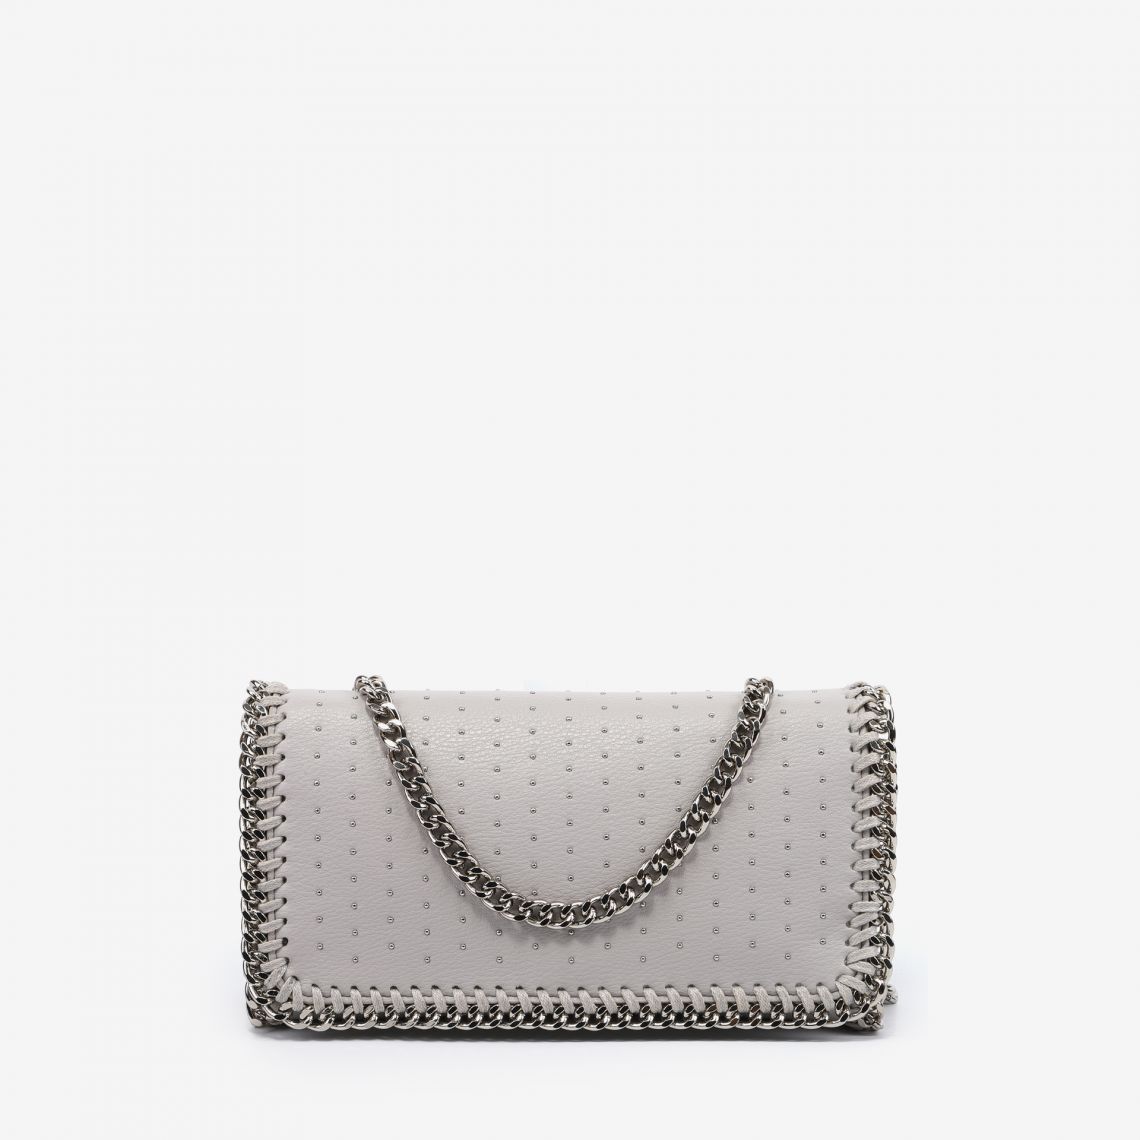 (image for) Sconti Online Clutch Ice borse outlet online